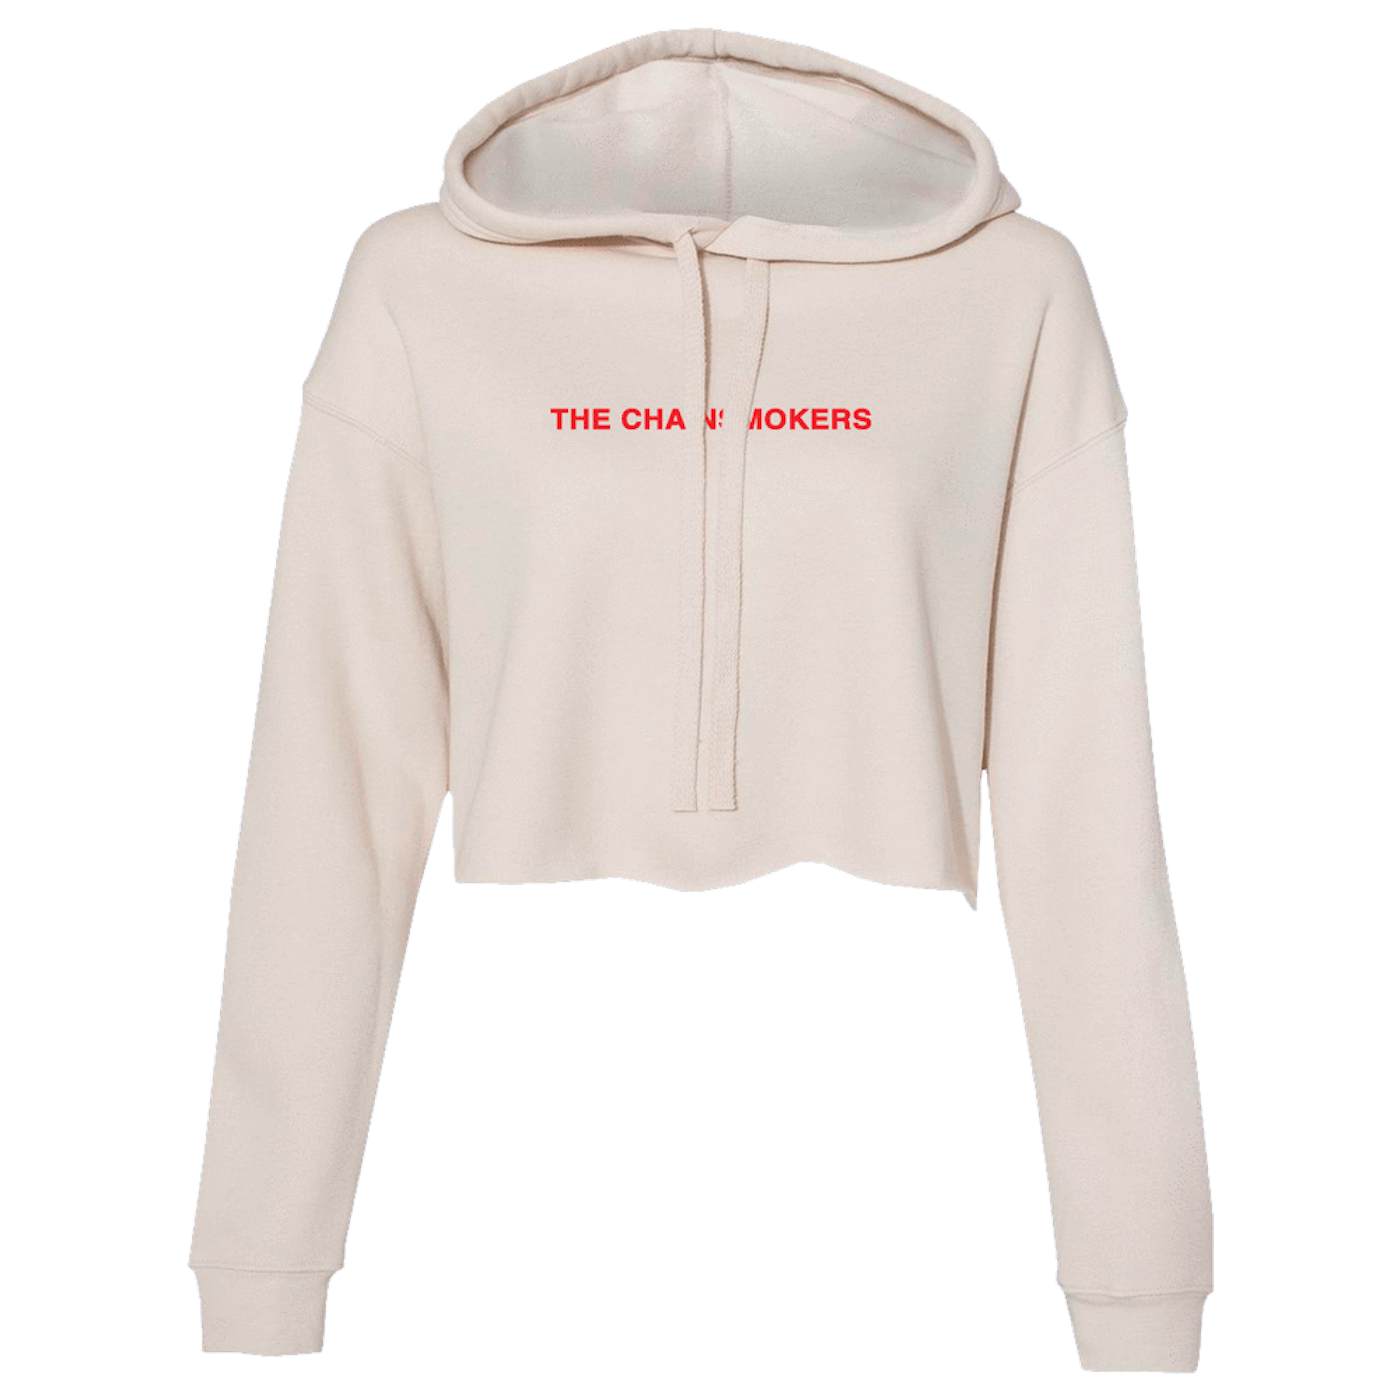 The Chainsmokers Triad Cropped Hoodie